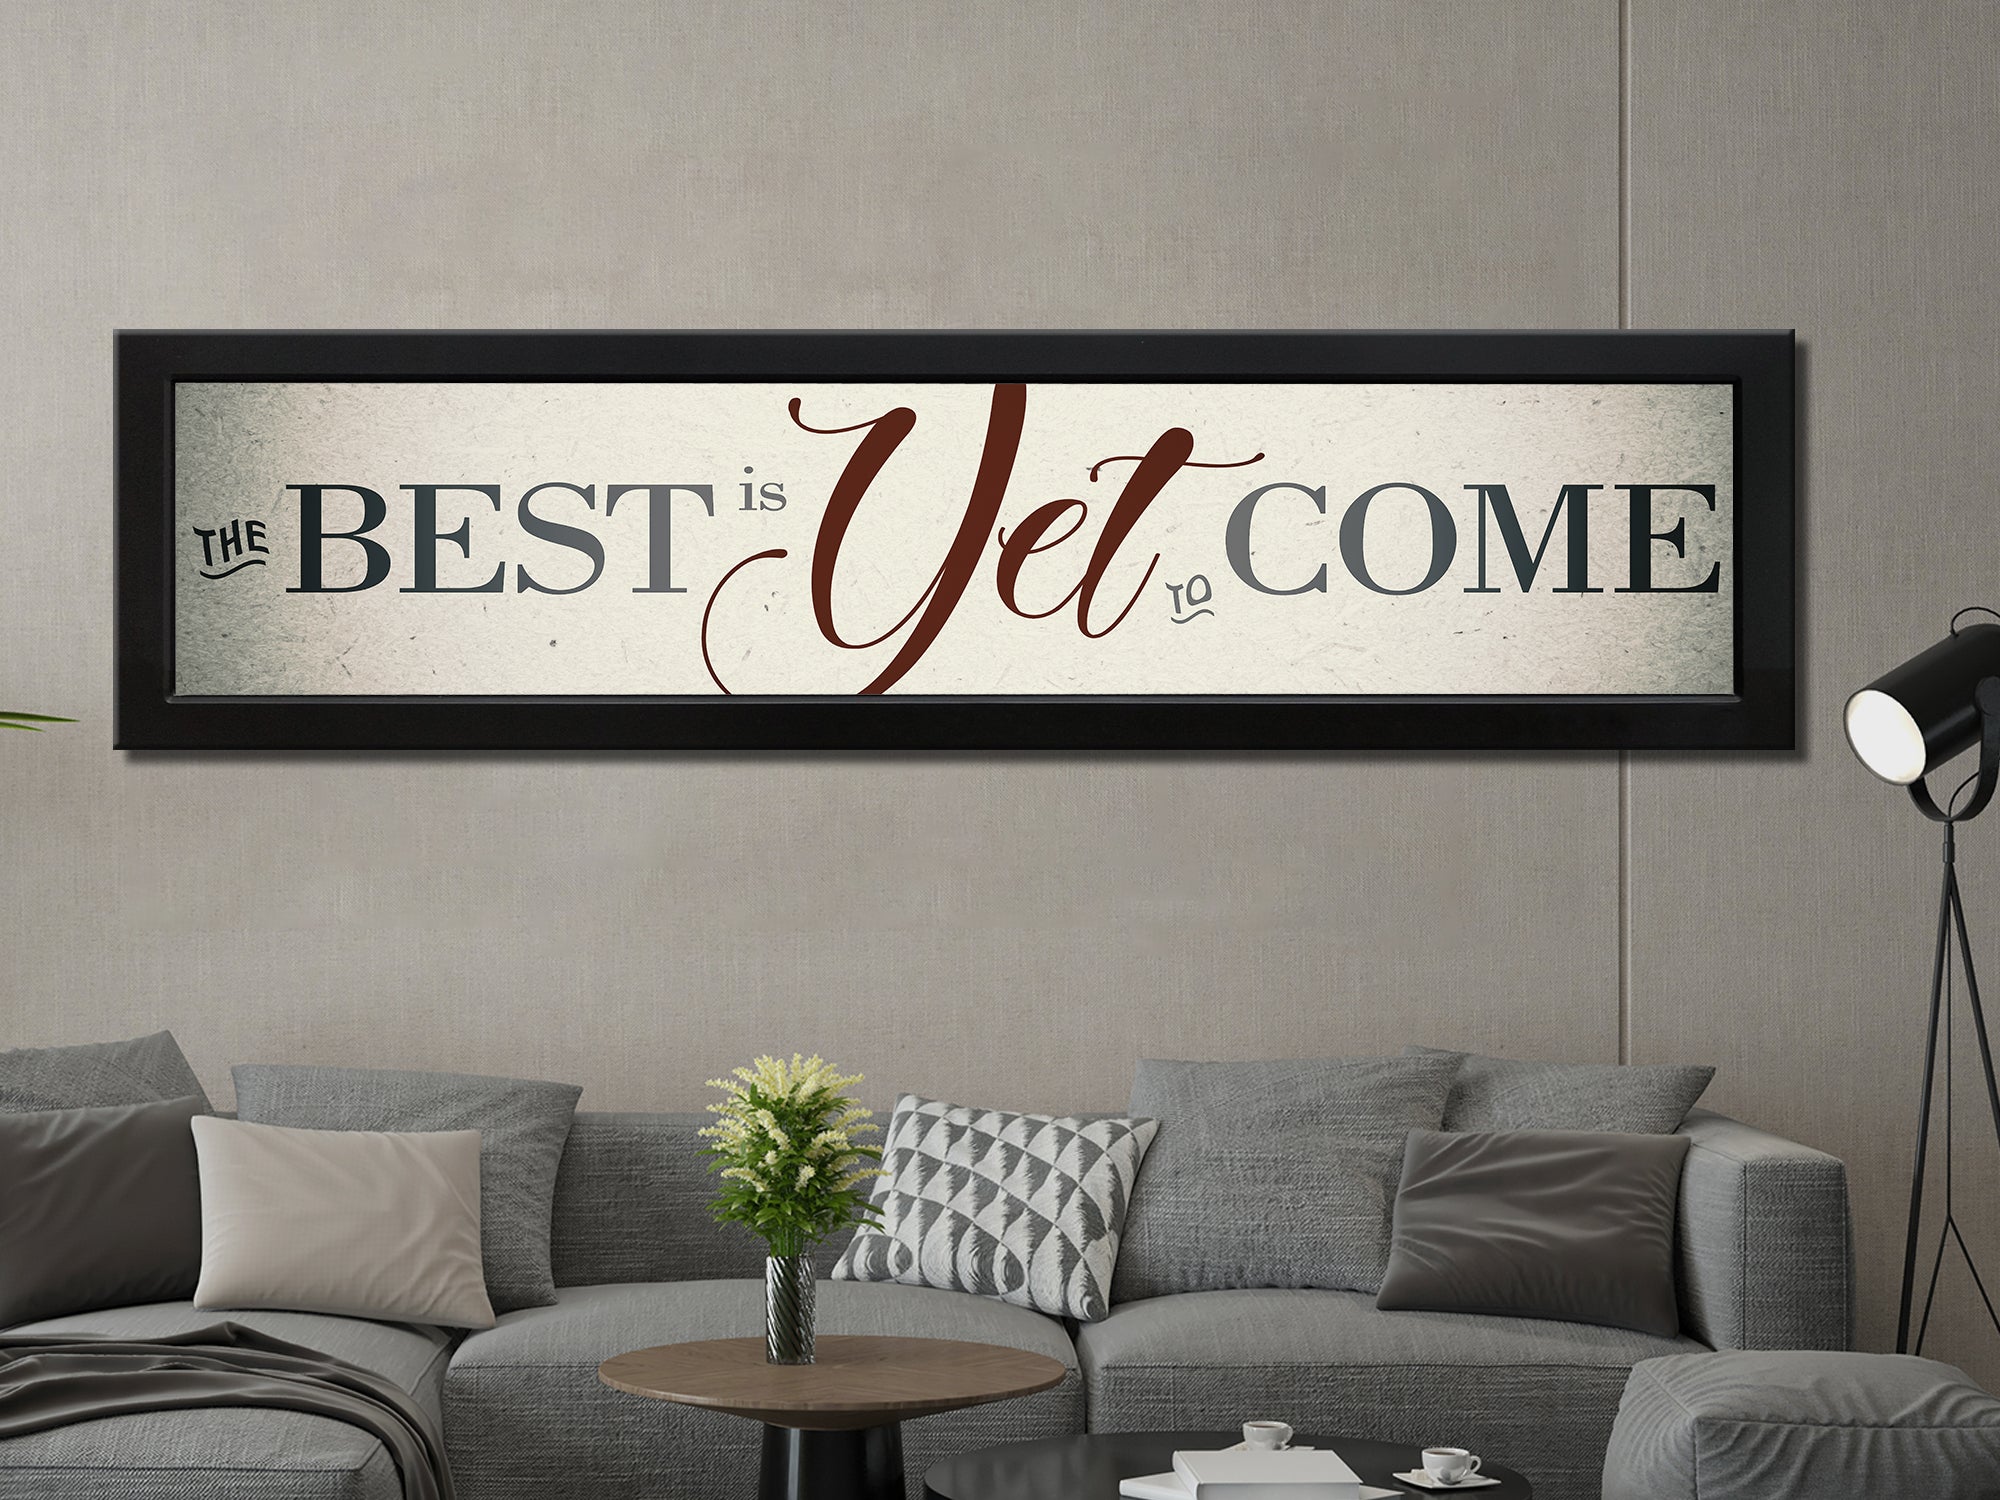 Best Is Yet To Come - Christian - Living Room Canvas Wall Art